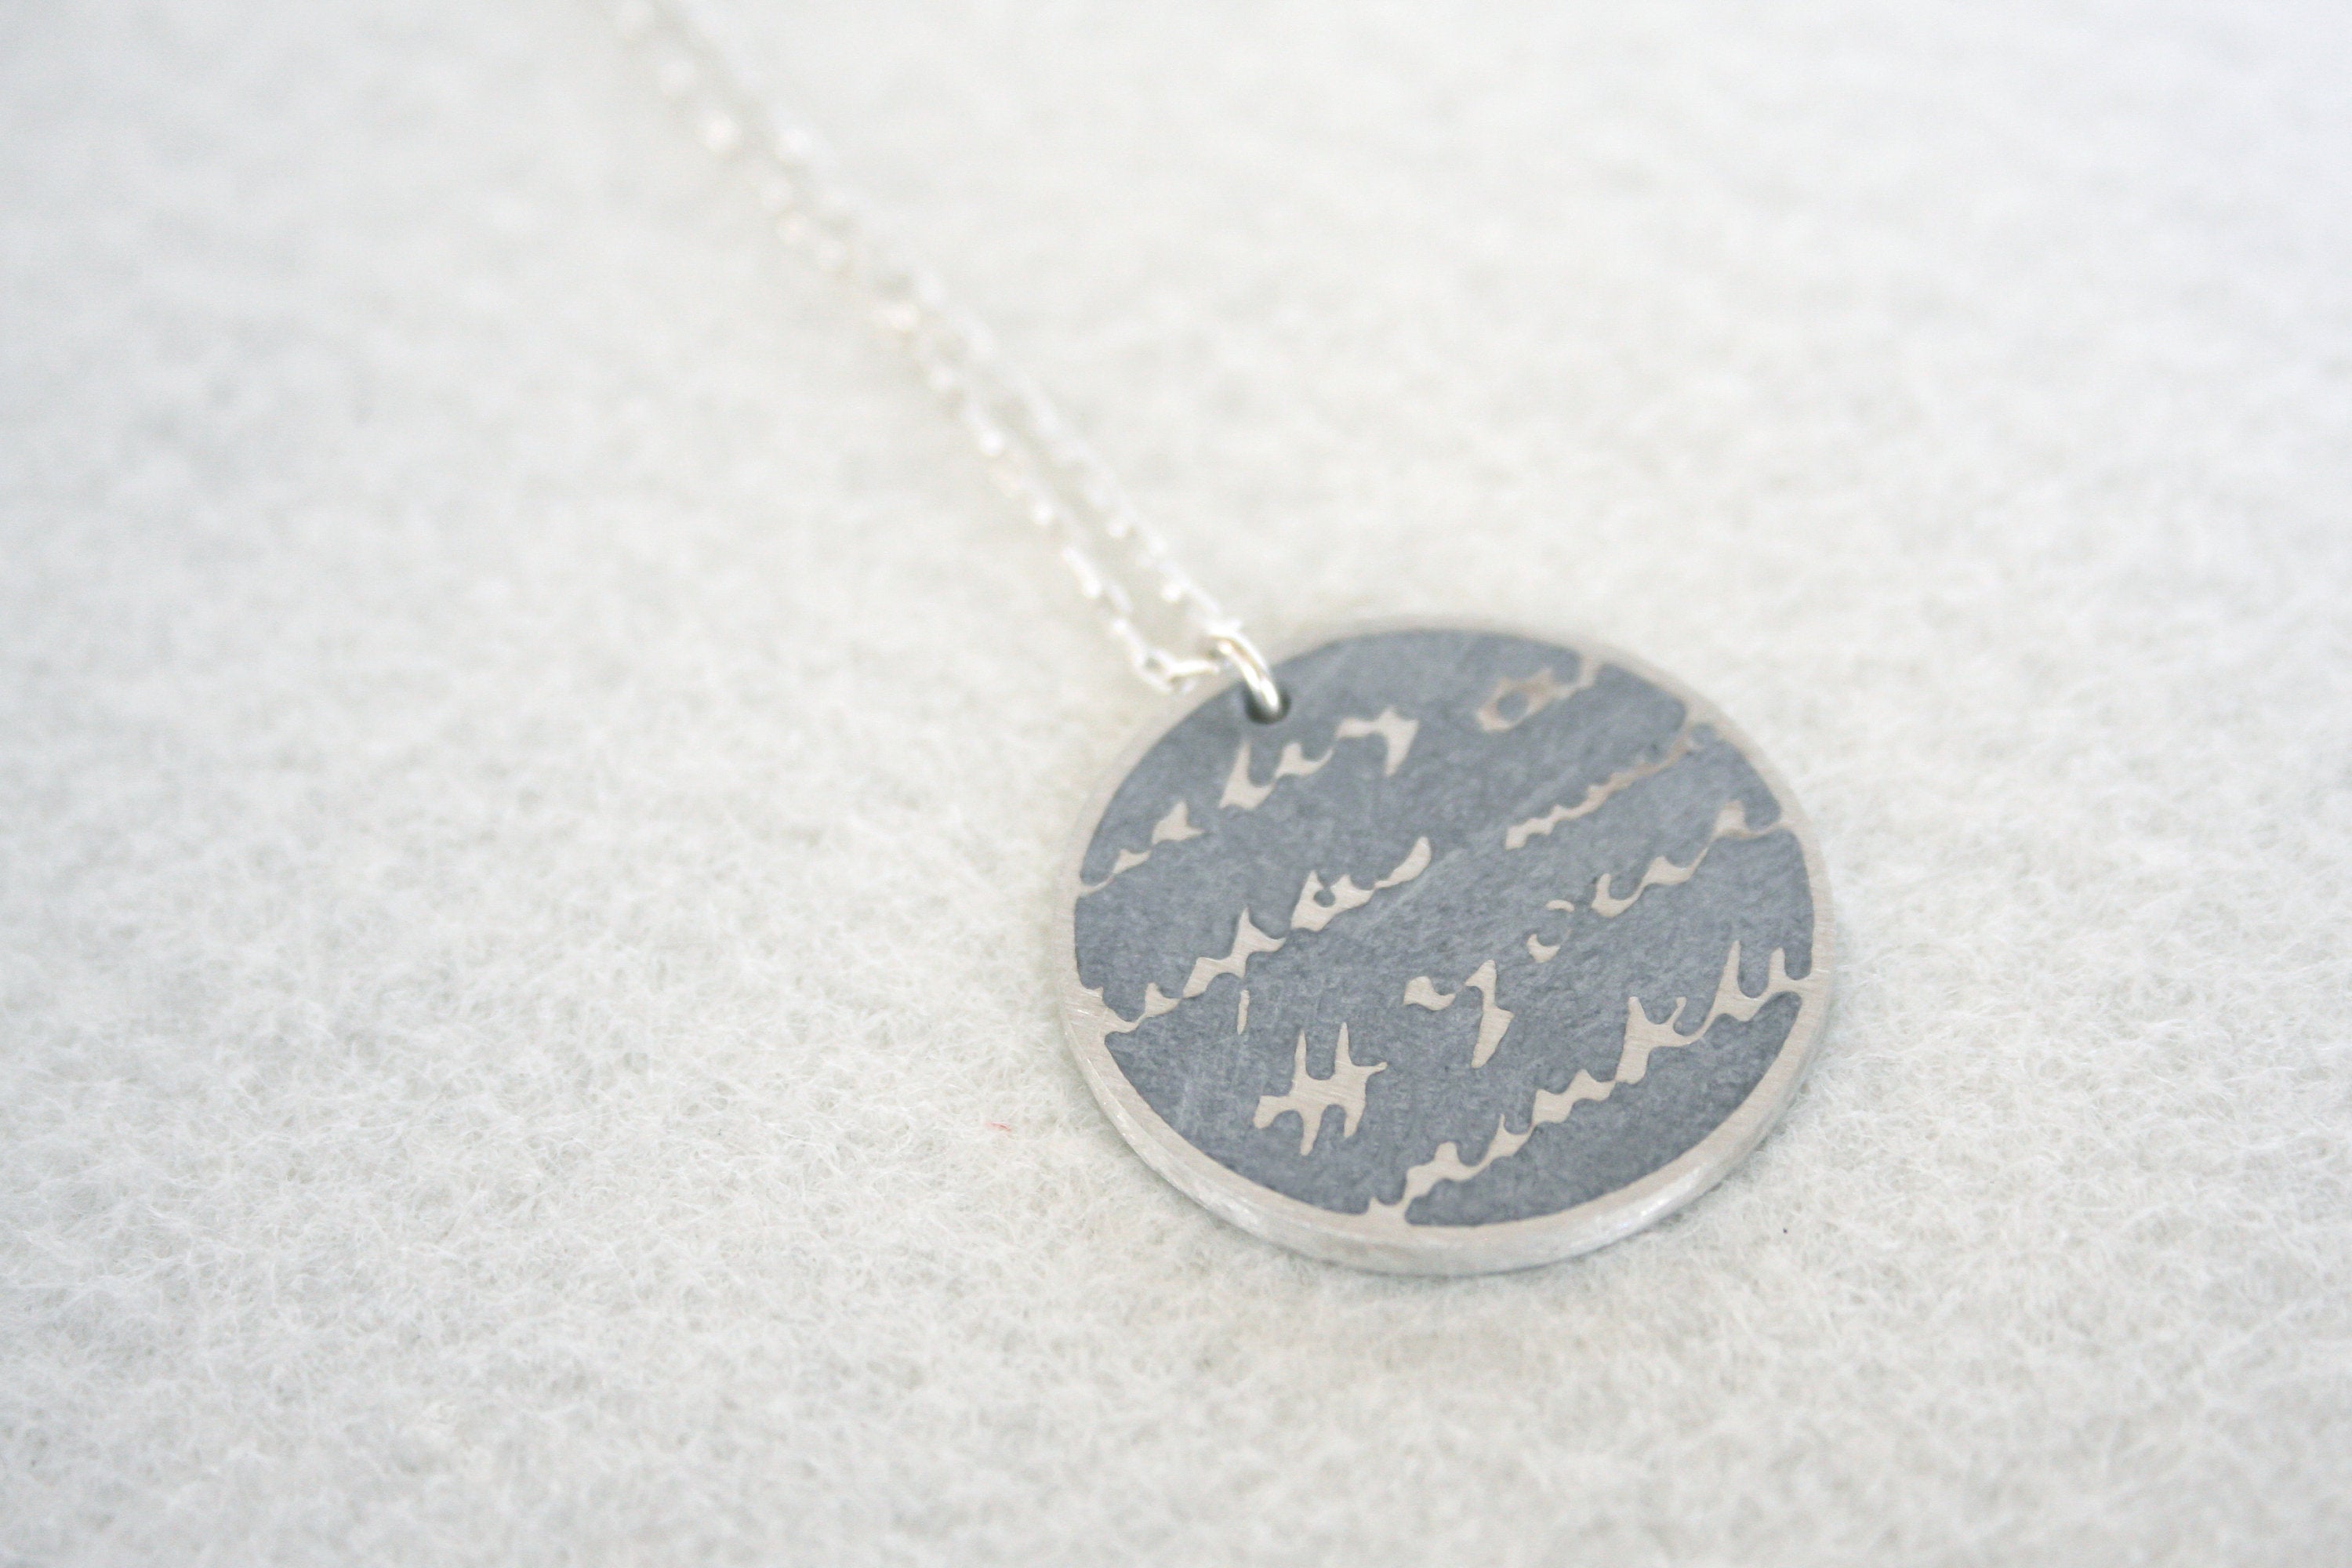 Round concrete & Silver Handwriting Text Pendant With long Silver 925 Chain - hs